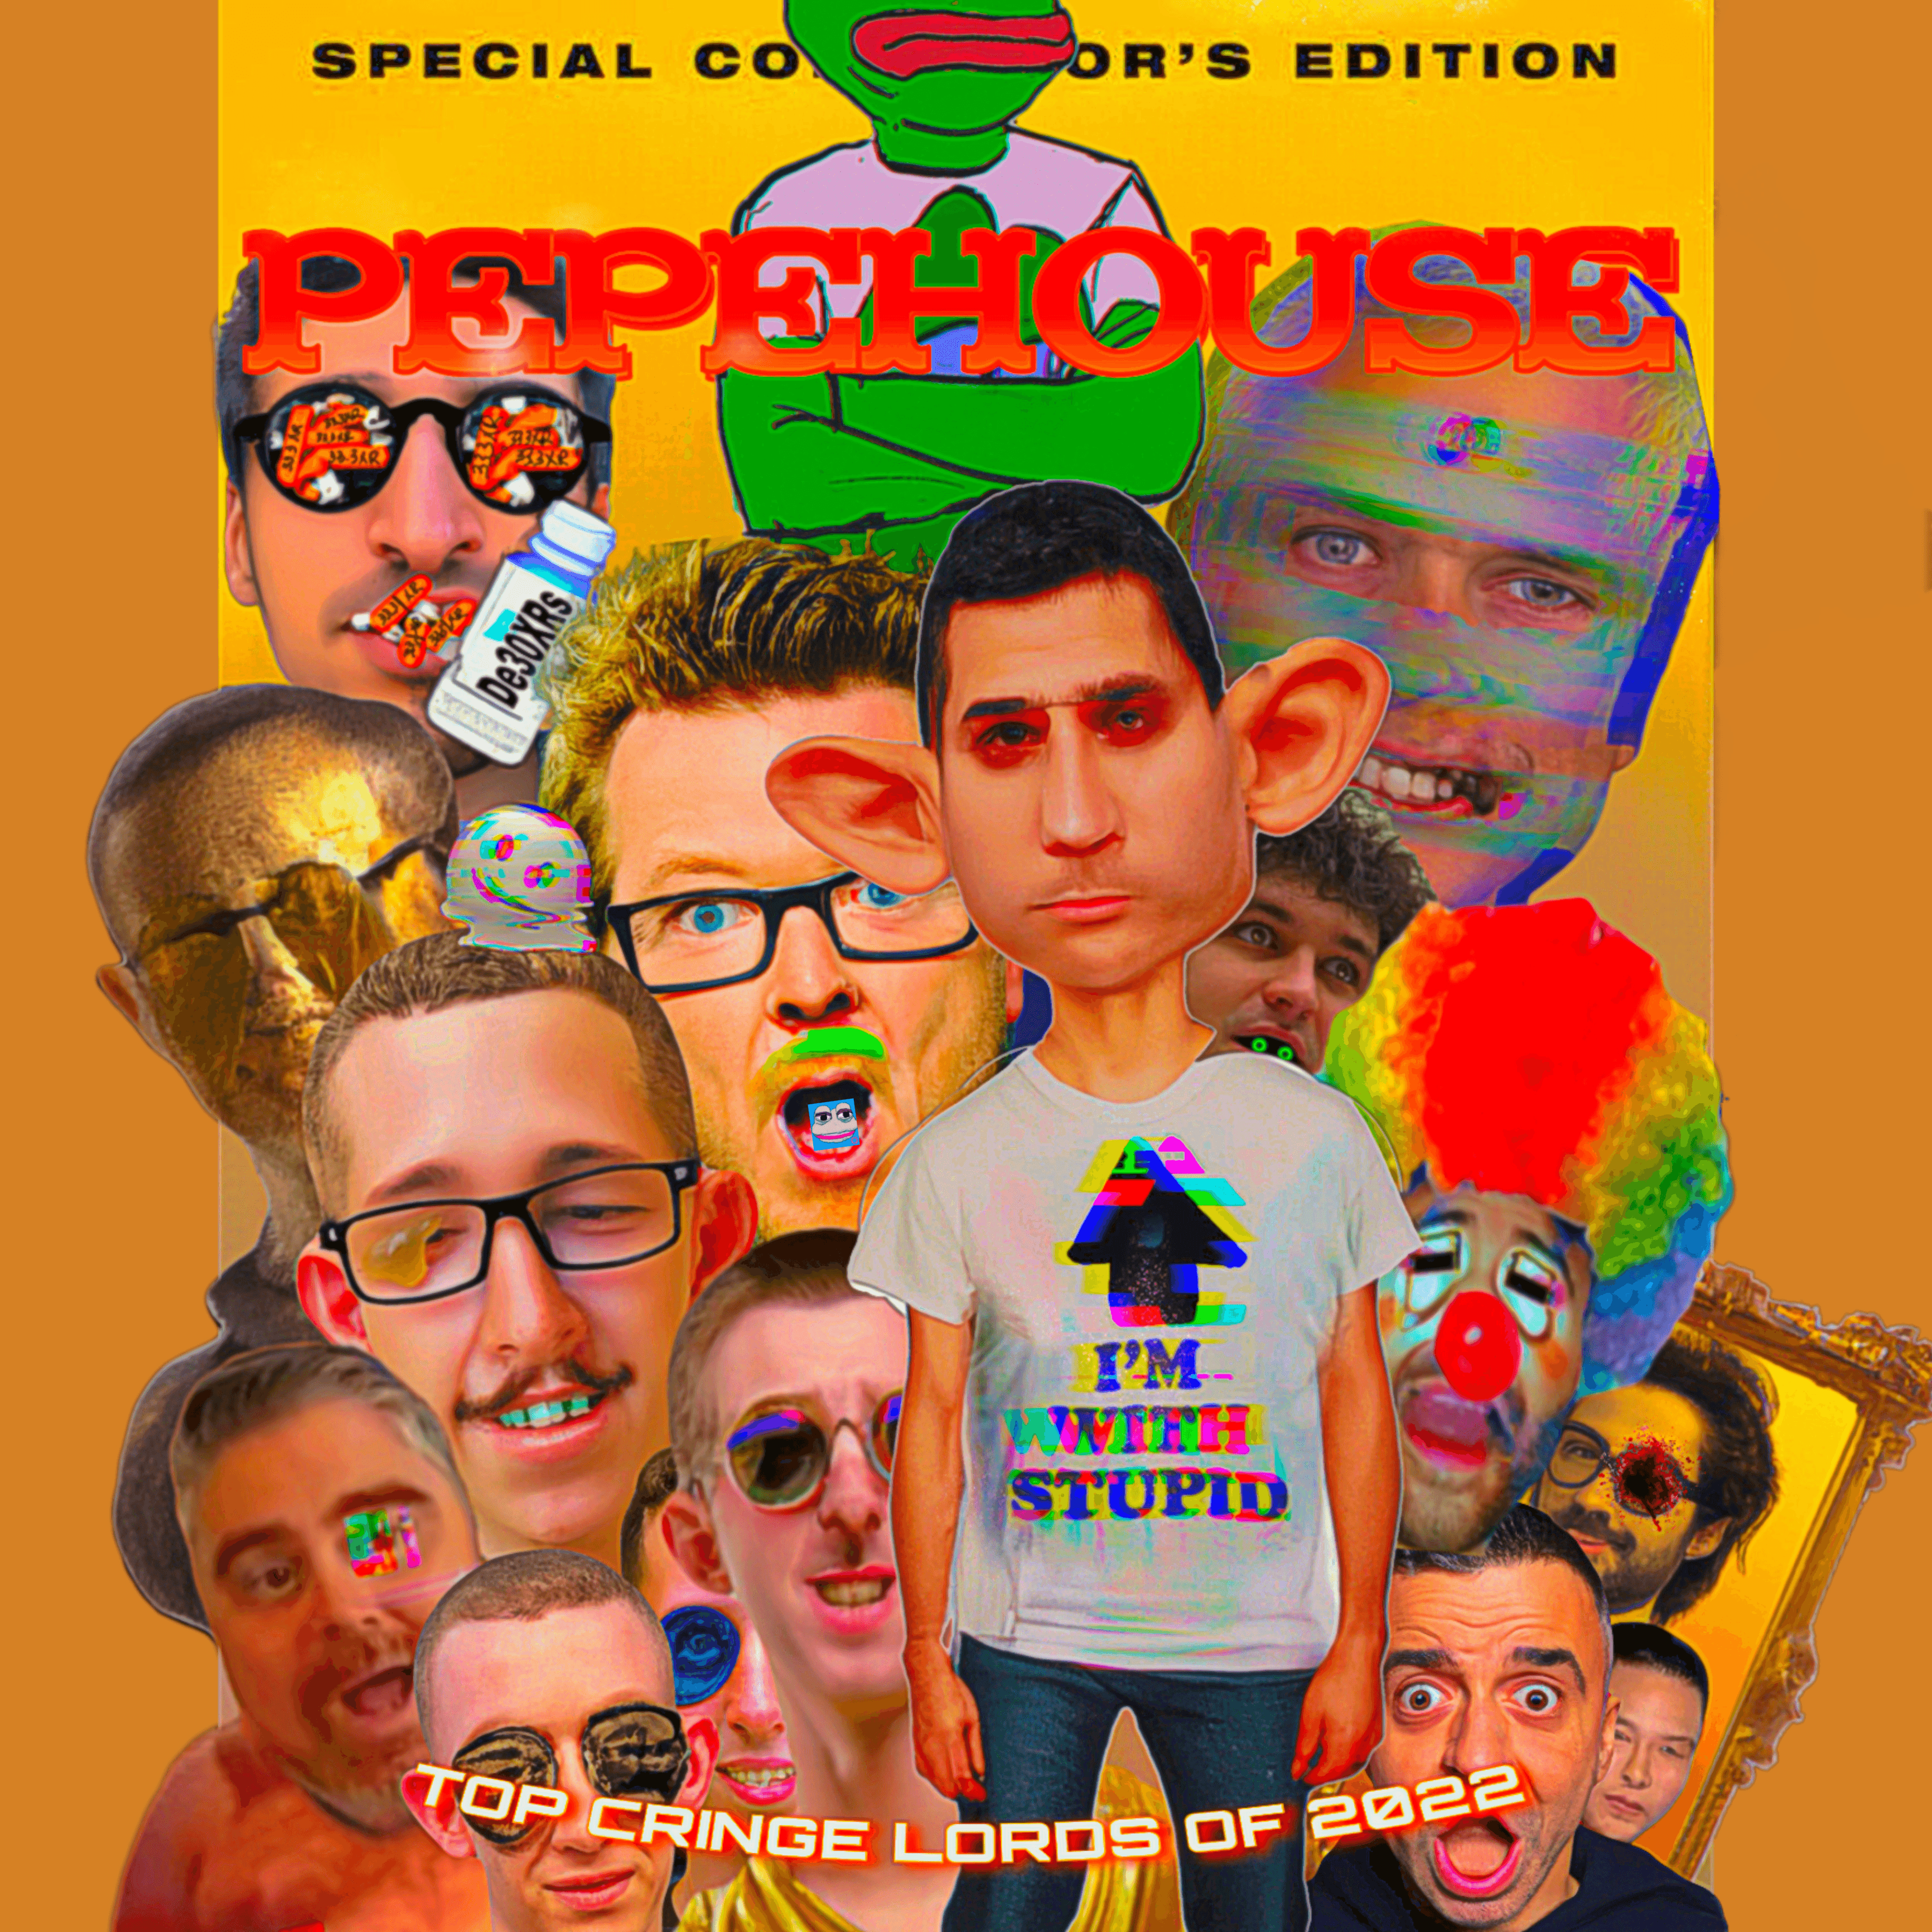 PEPEHOUSE - SPECIAL EDITION #36/69